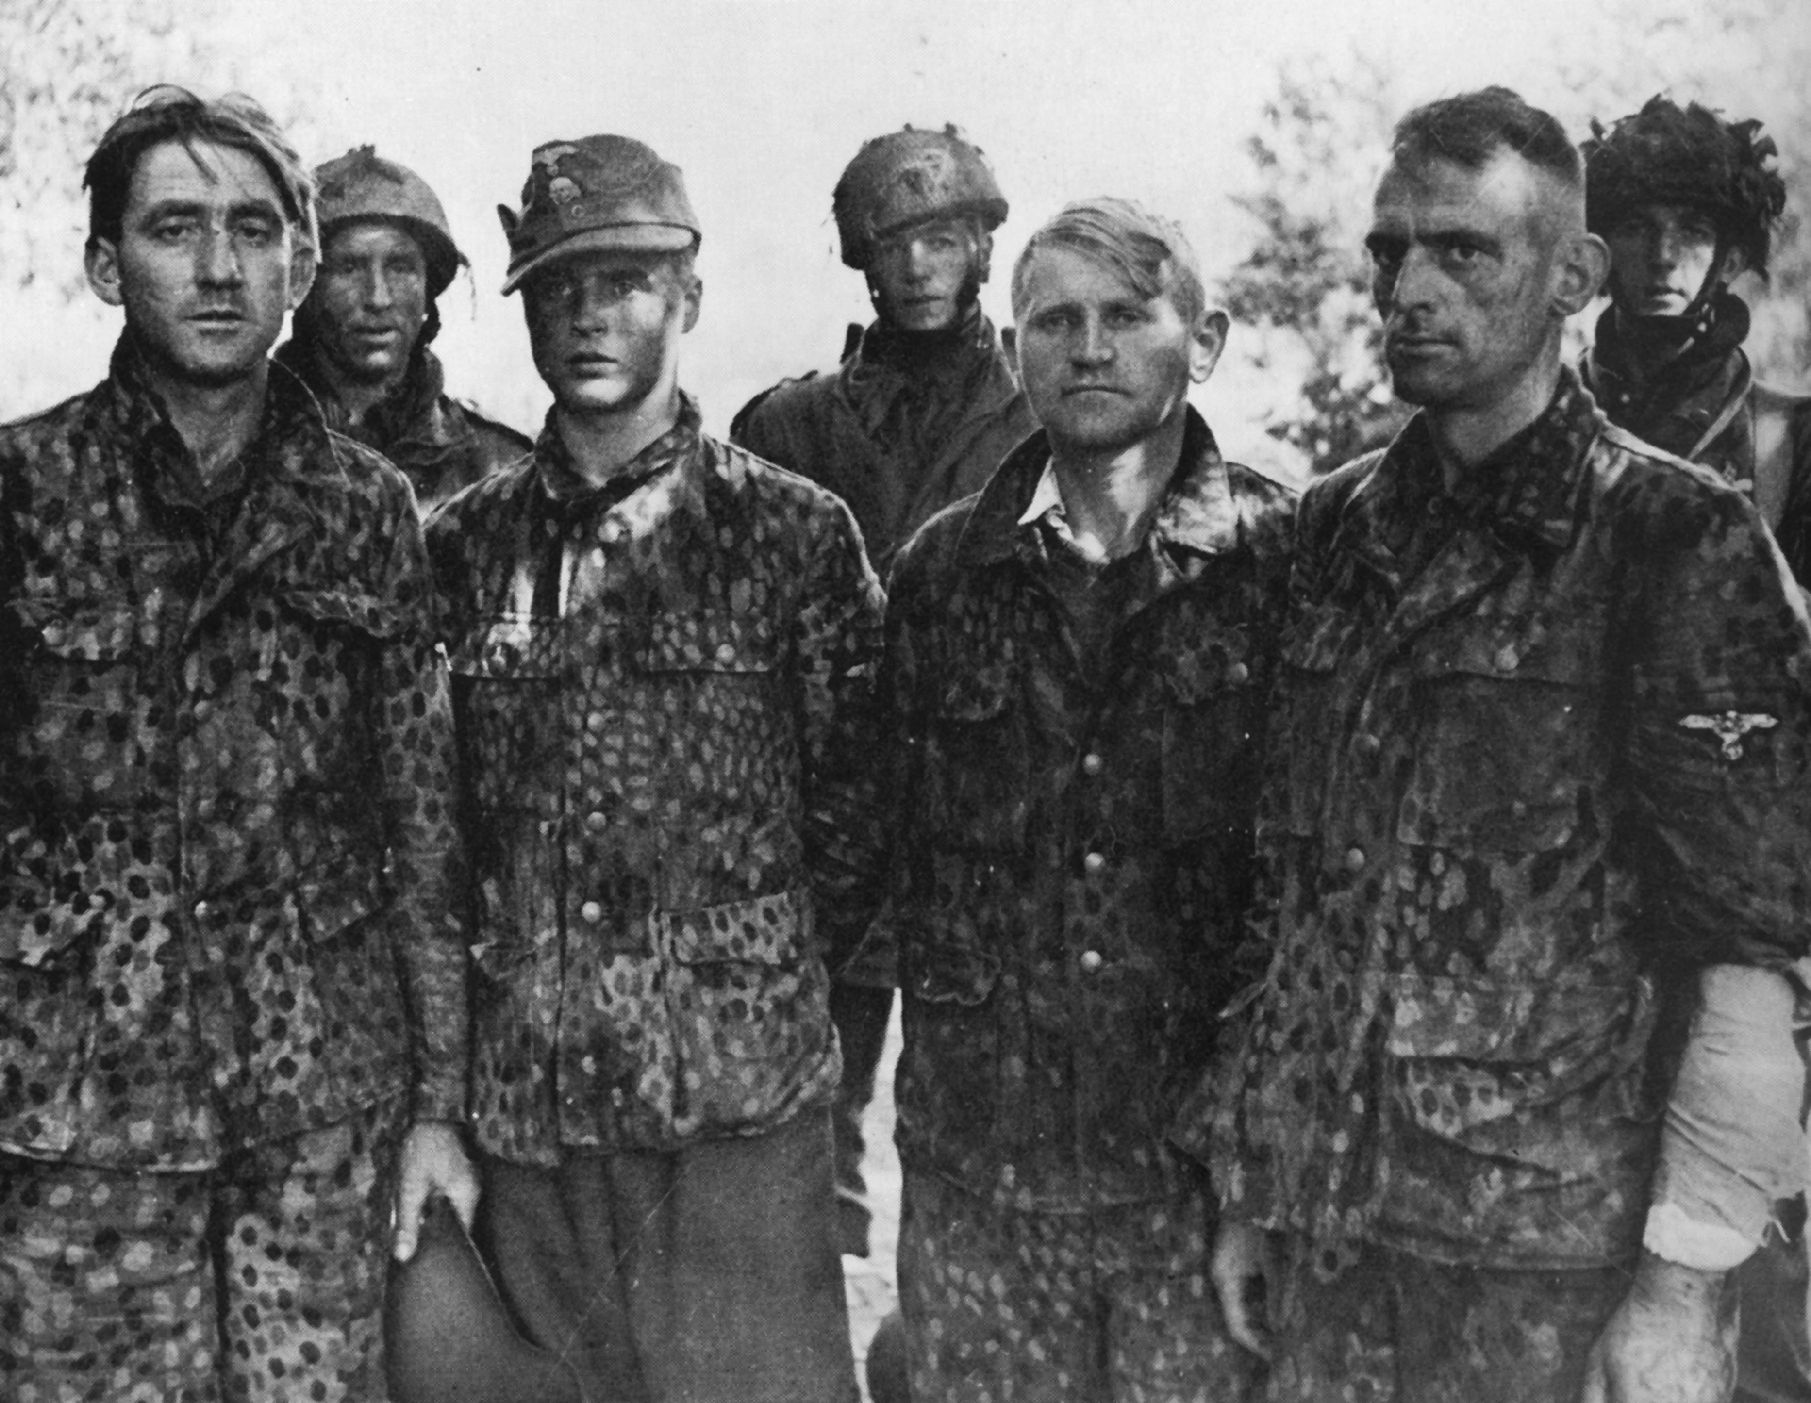 Paratroopers of the British 6th Airborne Division pose for the camera with several captured members of the SS who escaped from prison in Great Britain. (National Archives)